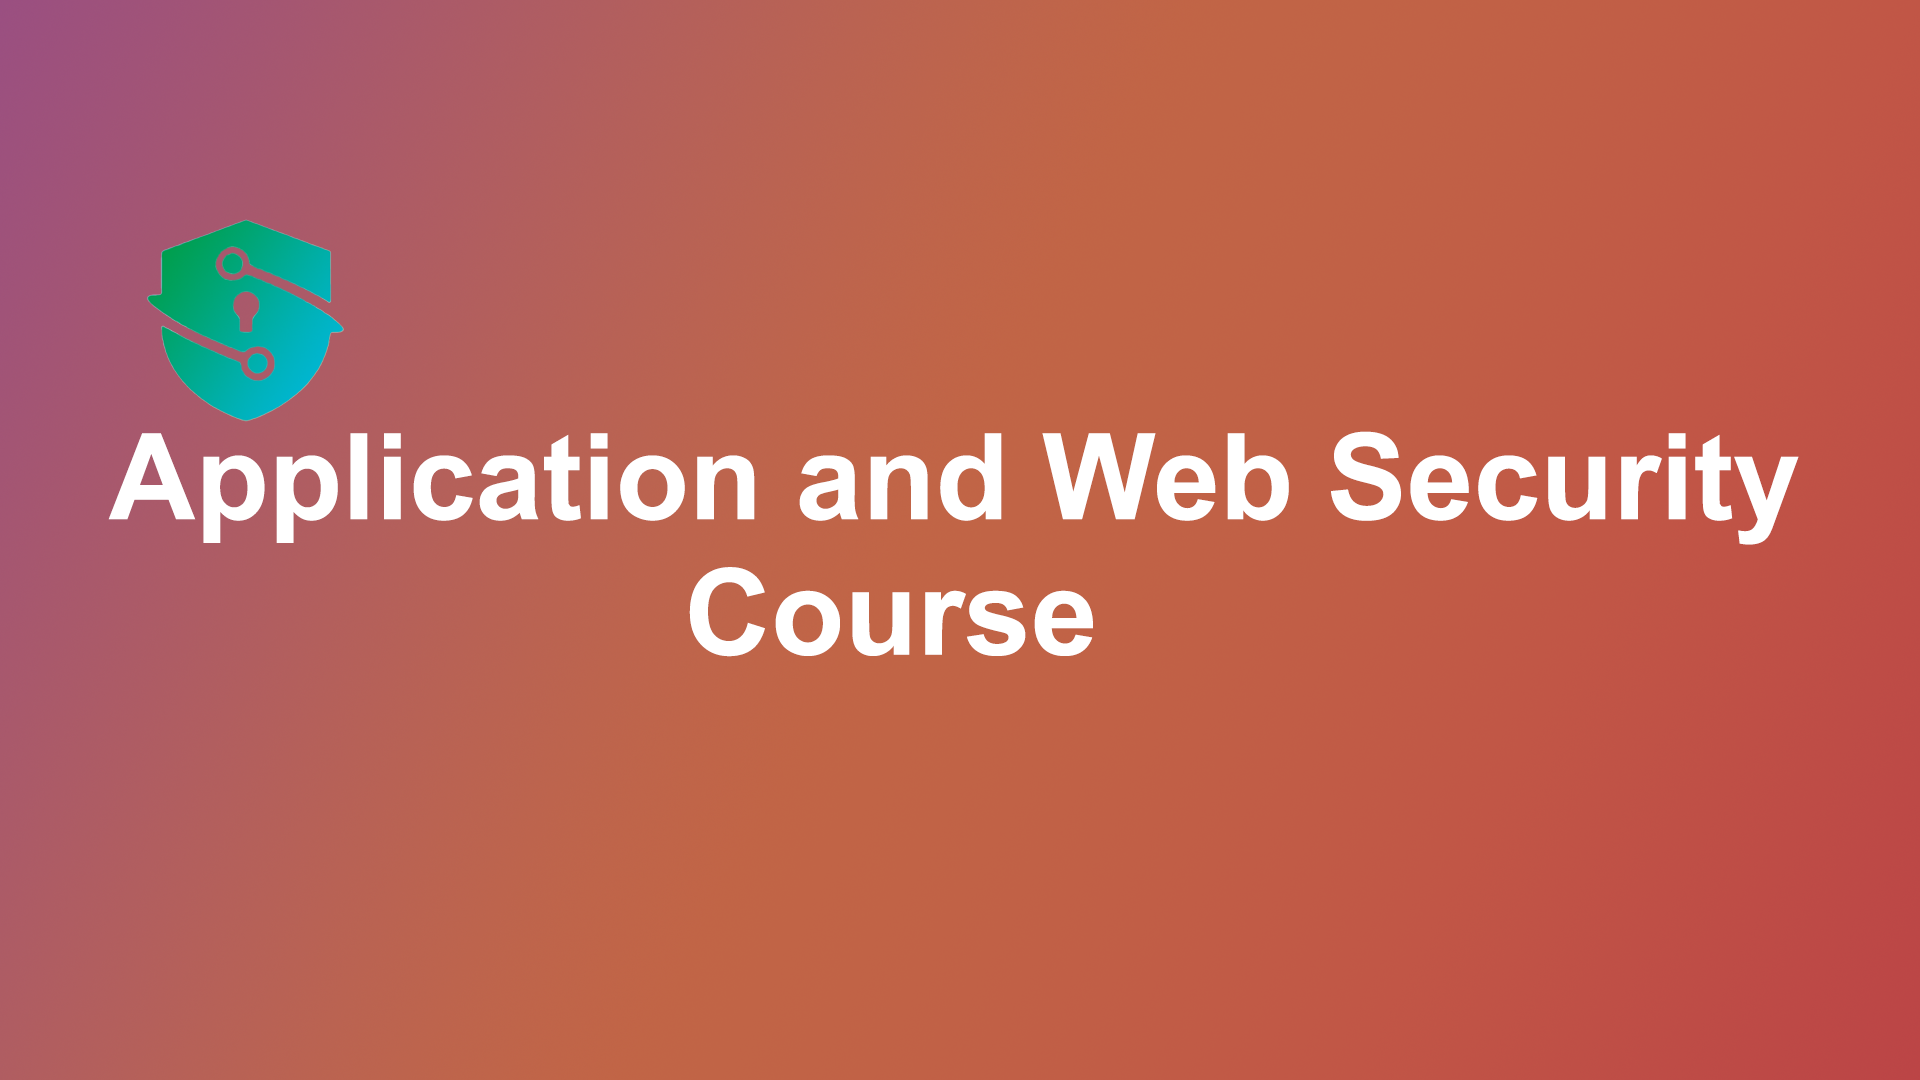 Application and Web Security Training Course